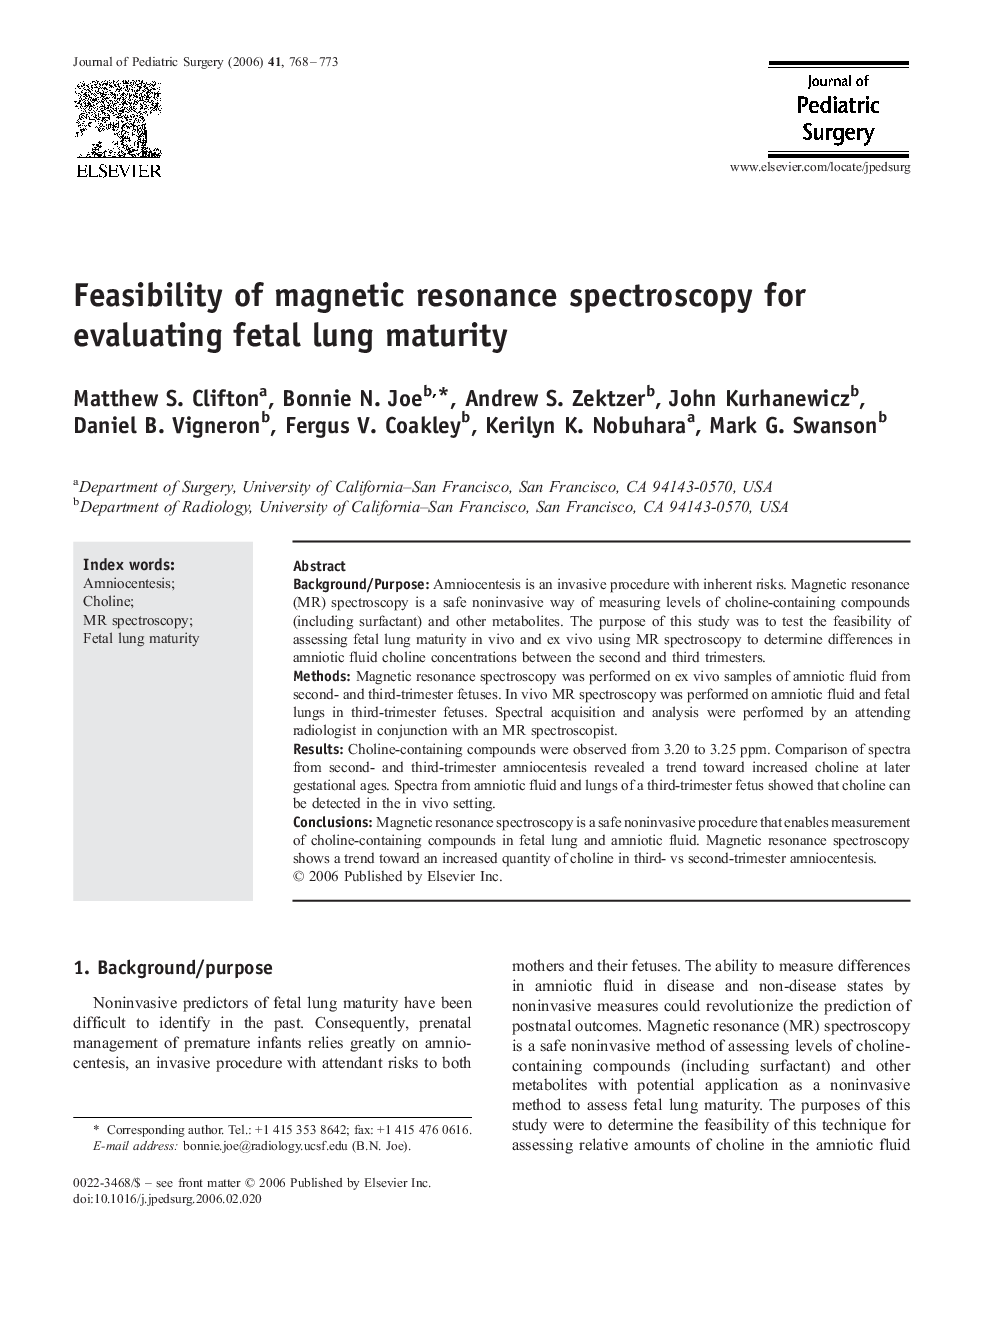 Feasibility of magnetic resonance spectroscopy for evaluating fetal lung maturity